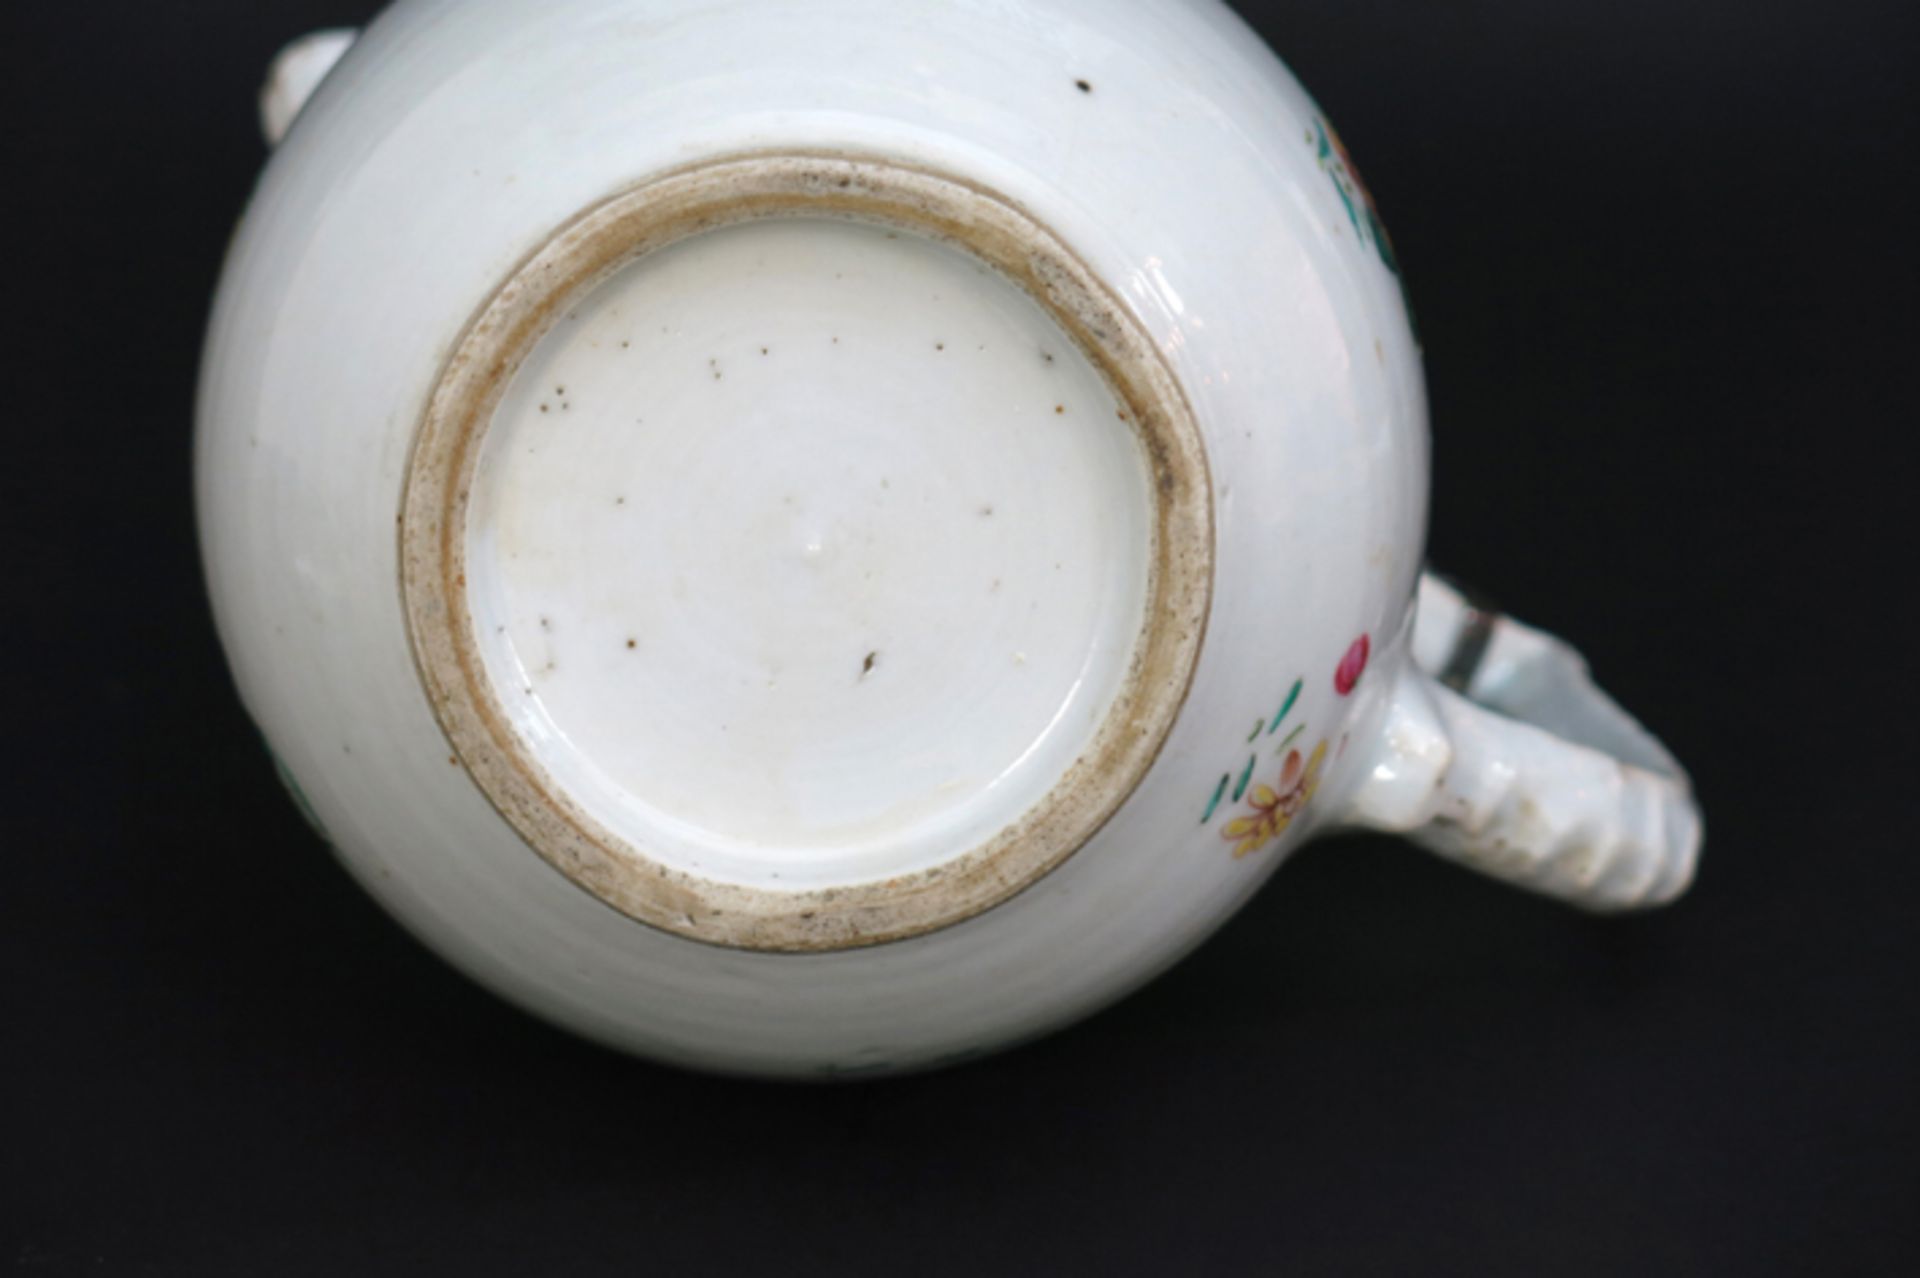 mid 18th Cent. Chinese coffeepot in porcelain with a nice decor with flowers and [...] - Image 5 of 6